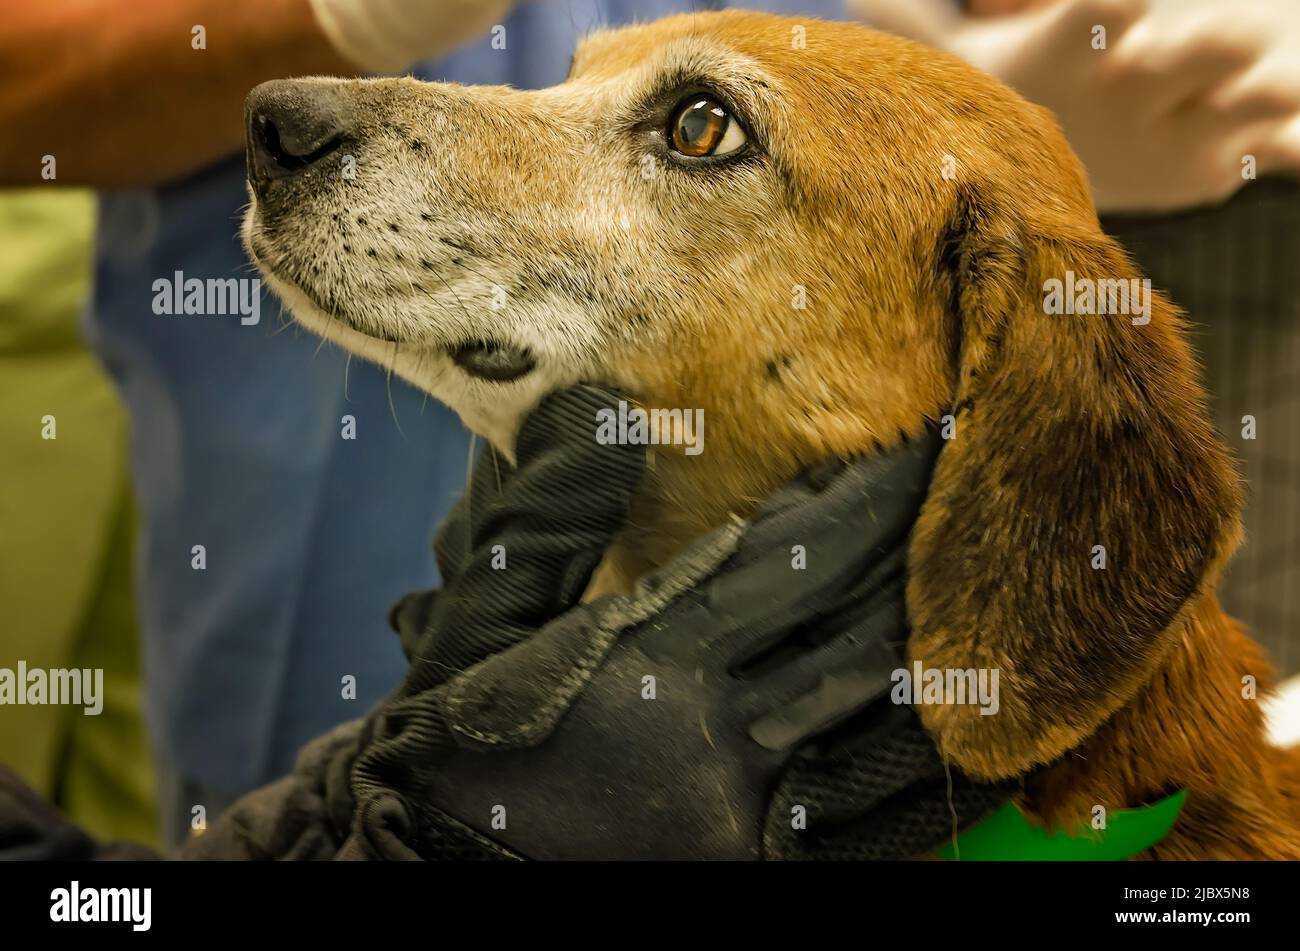 A frightened dog is held by a U.S. Humane Society worker as it is examined by a veterinarian, Dec. 7, 2011, in Macon, Mississippi. Stock Photo